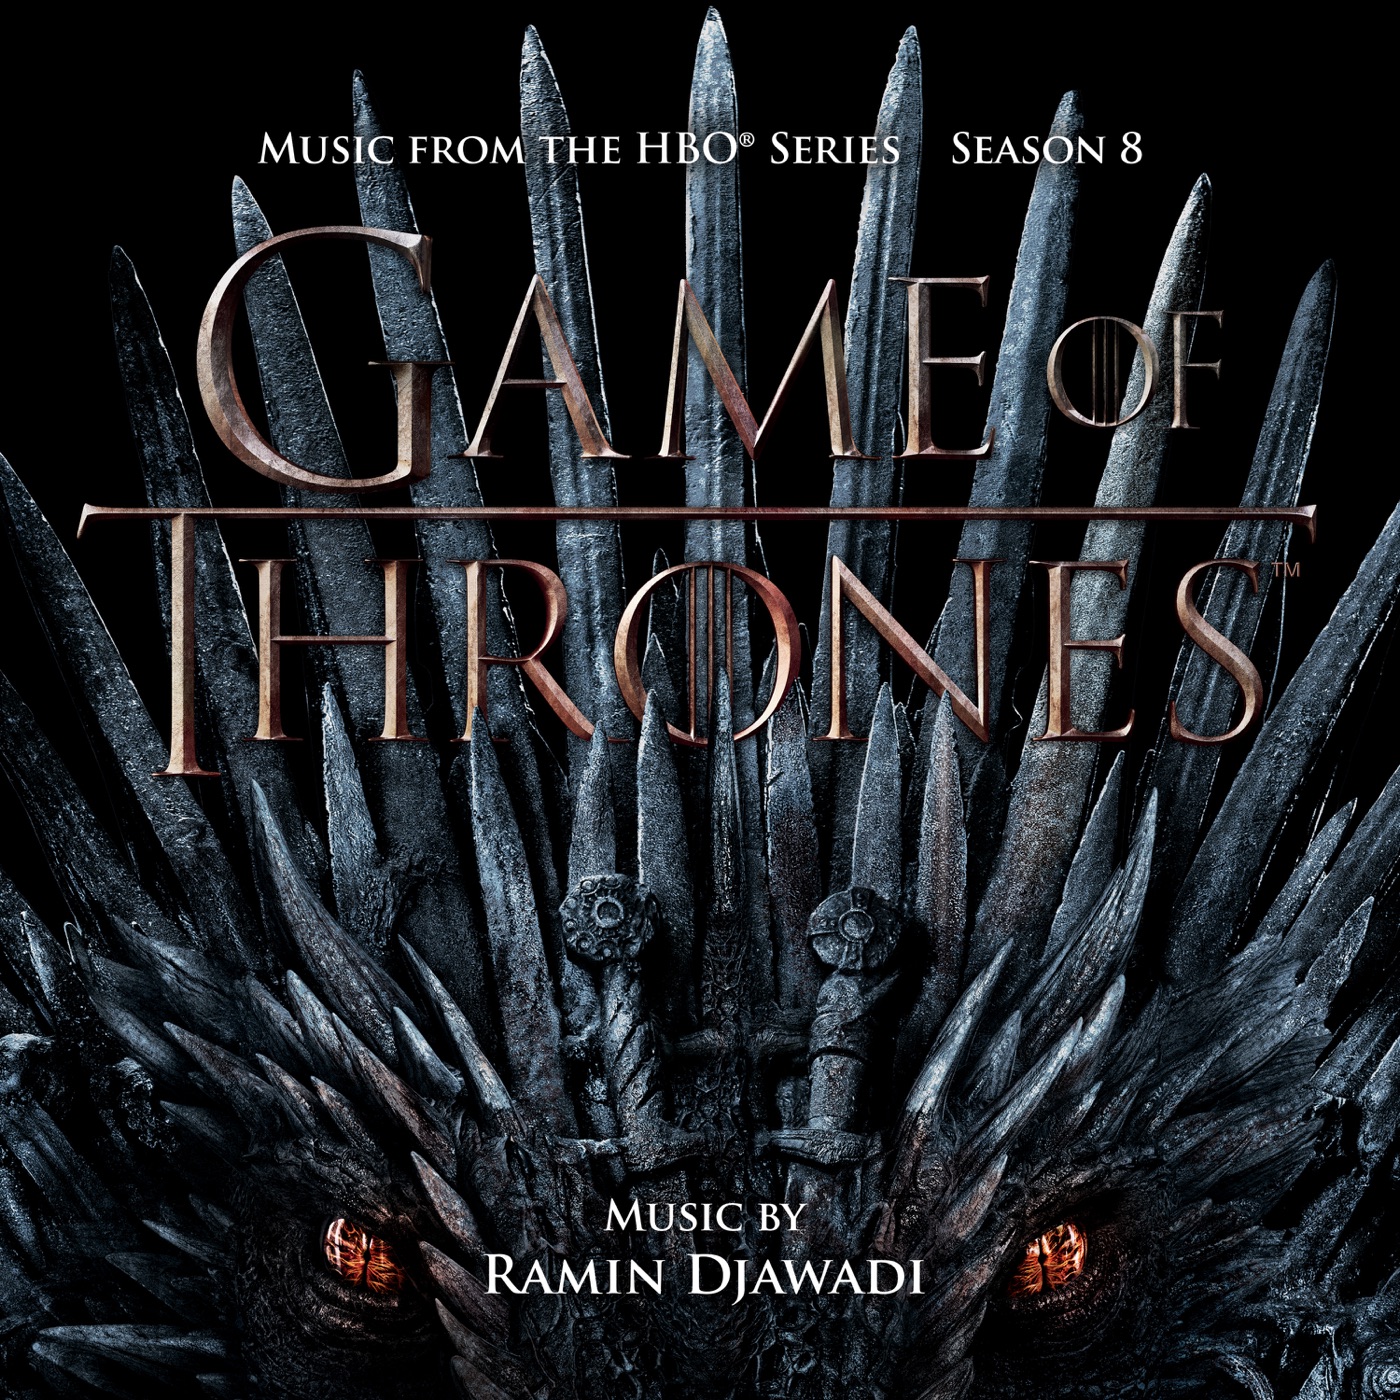 Game of Thrones: Season 8 (Music from the HBO Series) by Ramin Djawadi, Game Of Thrones: Season 8 (Music from the HBO Series)